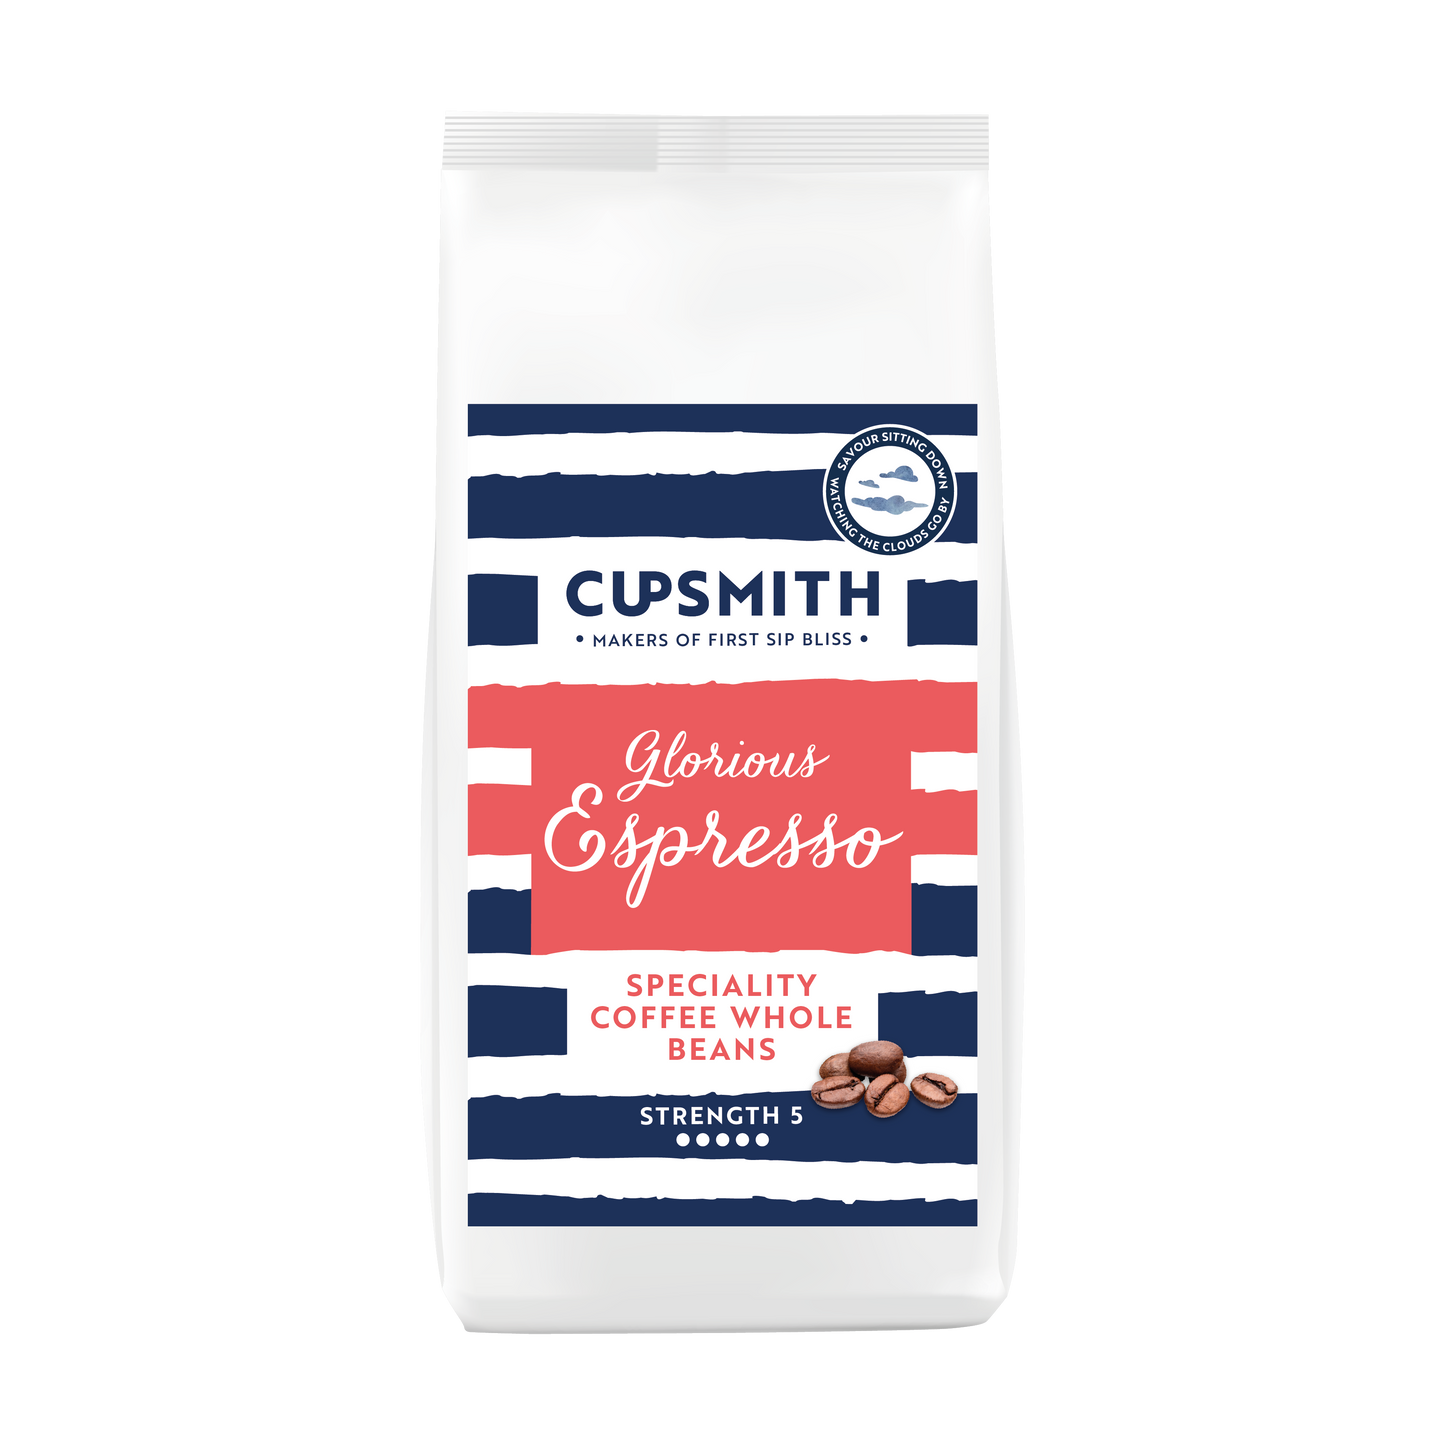 Cupsmith Speciality Glorious Espresso - beans & ground